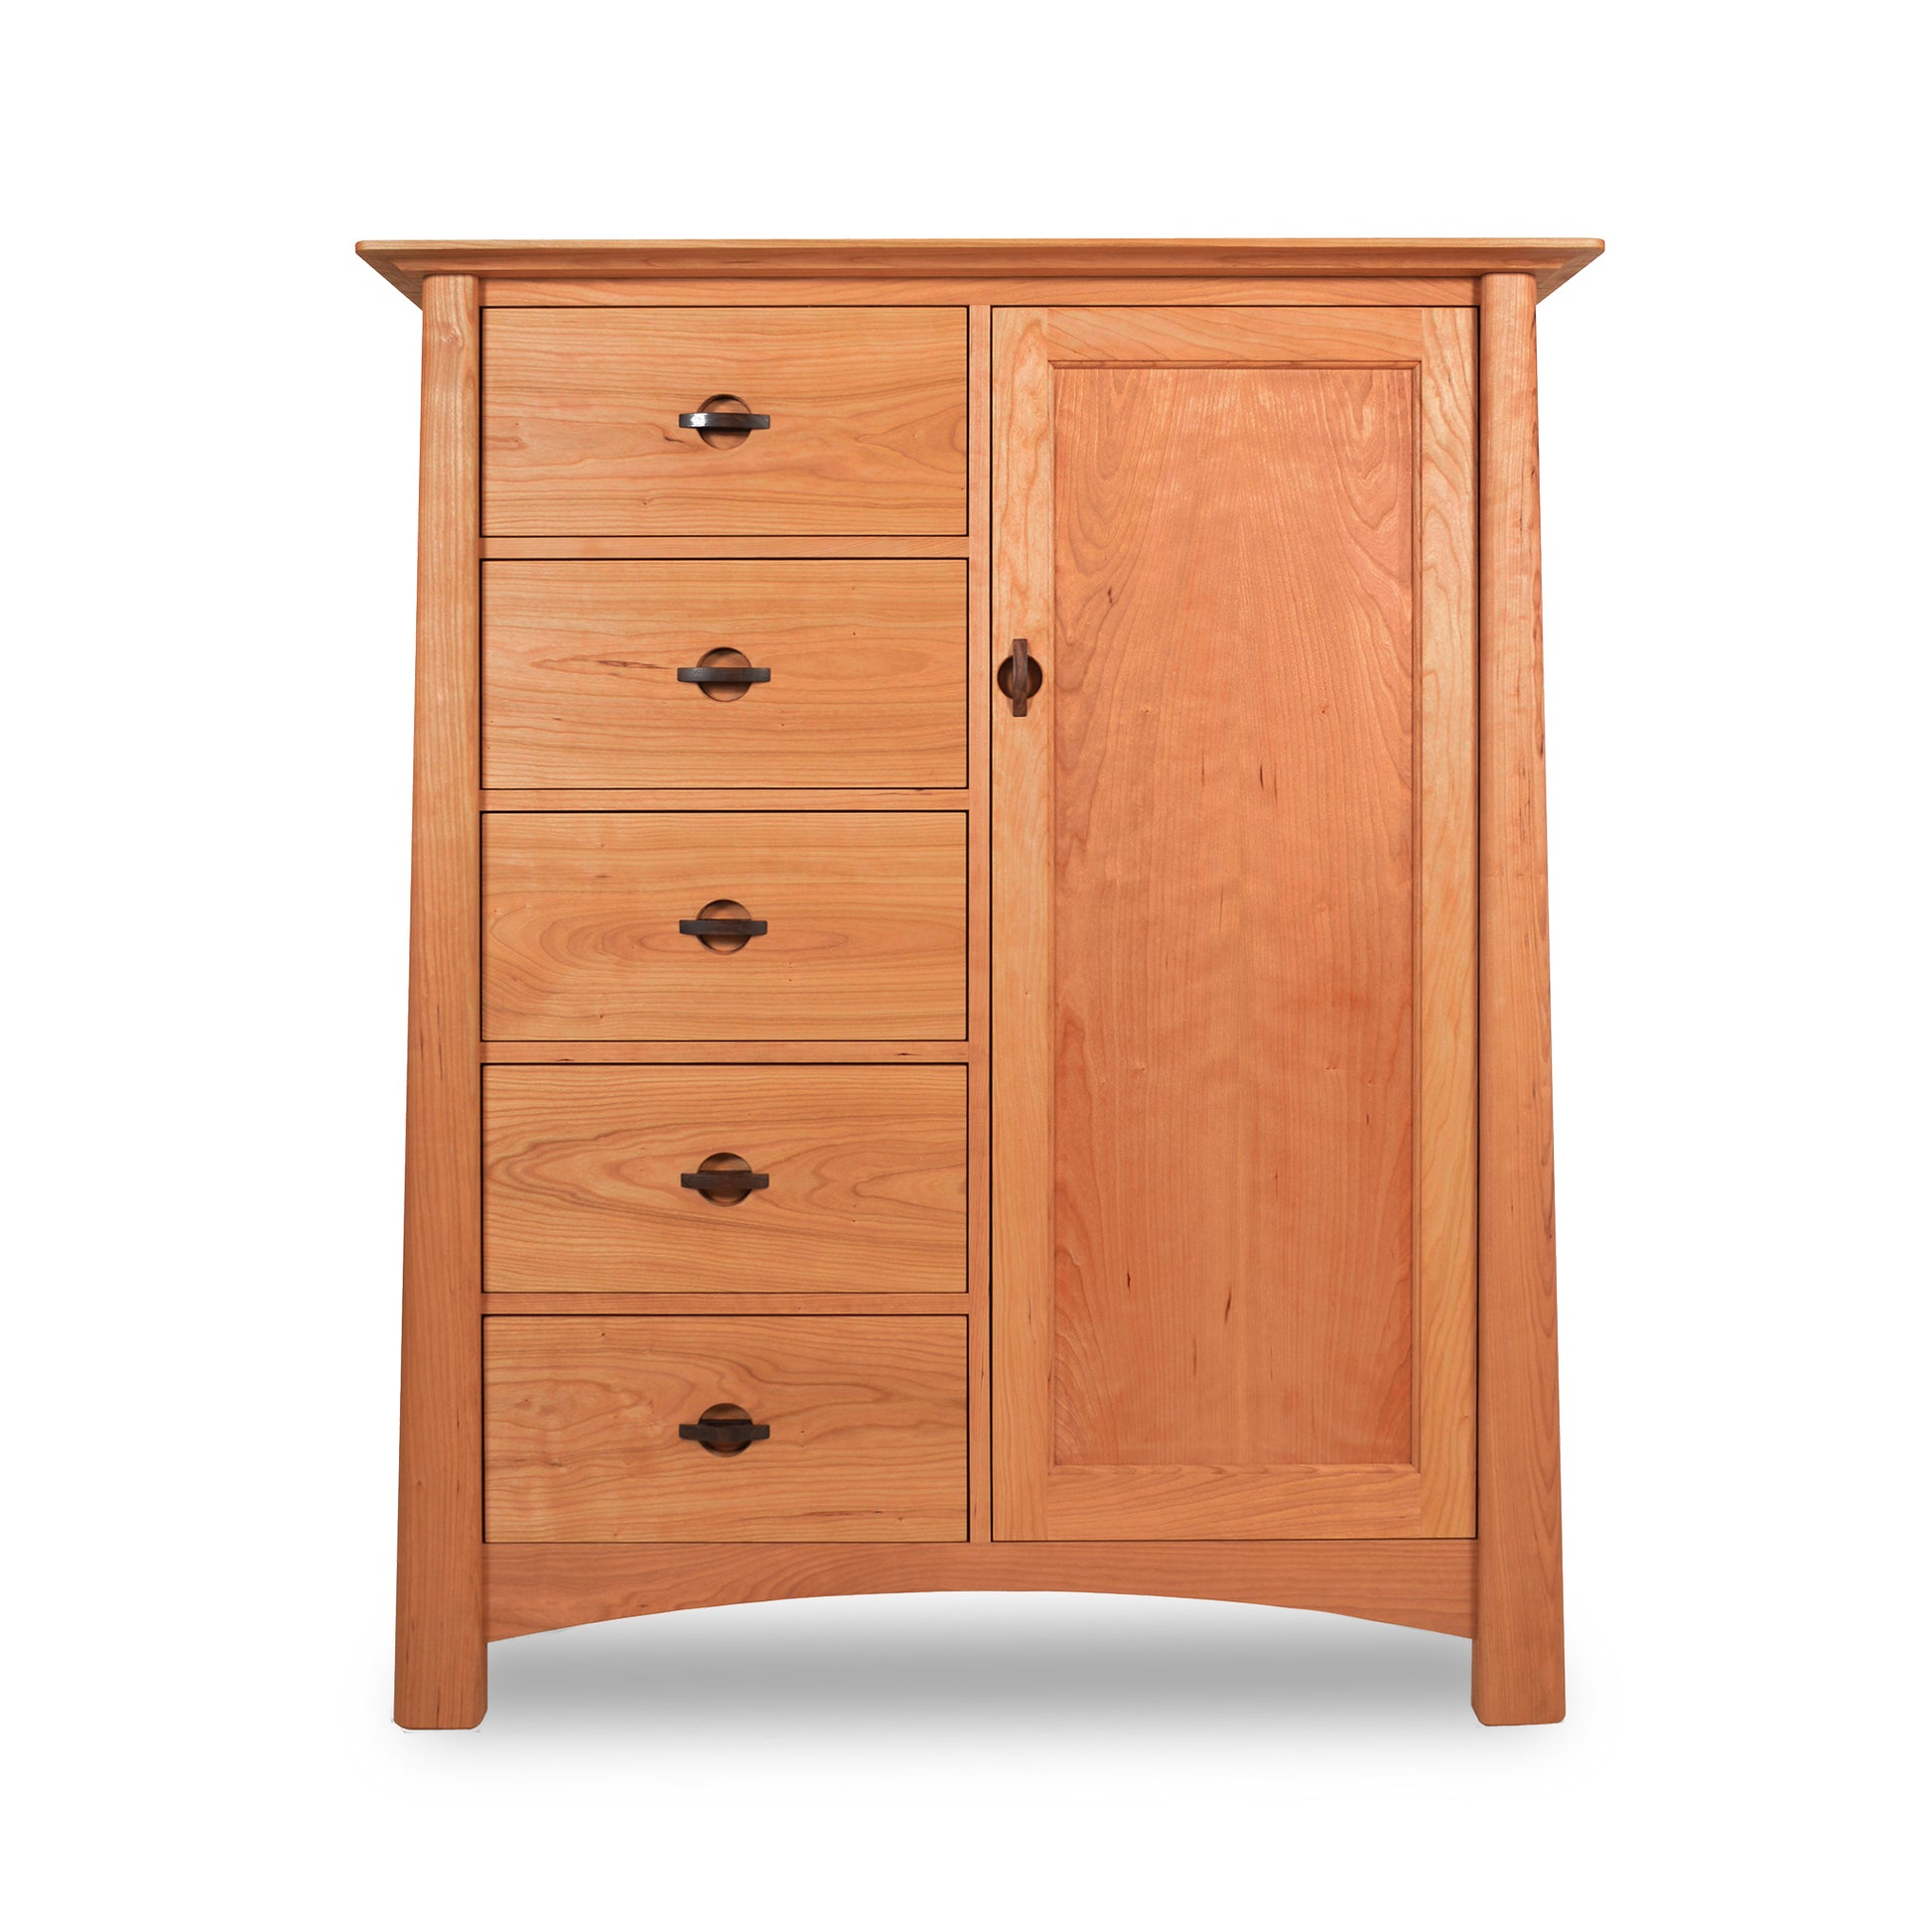 Maple Corner Woodworks Cherry Moon Sweater Chest, crafted from sustainably harvested solid woods with an eco-friendly oil finish, featuring four drawers on the left and a single door on the right, isolated on a white background.